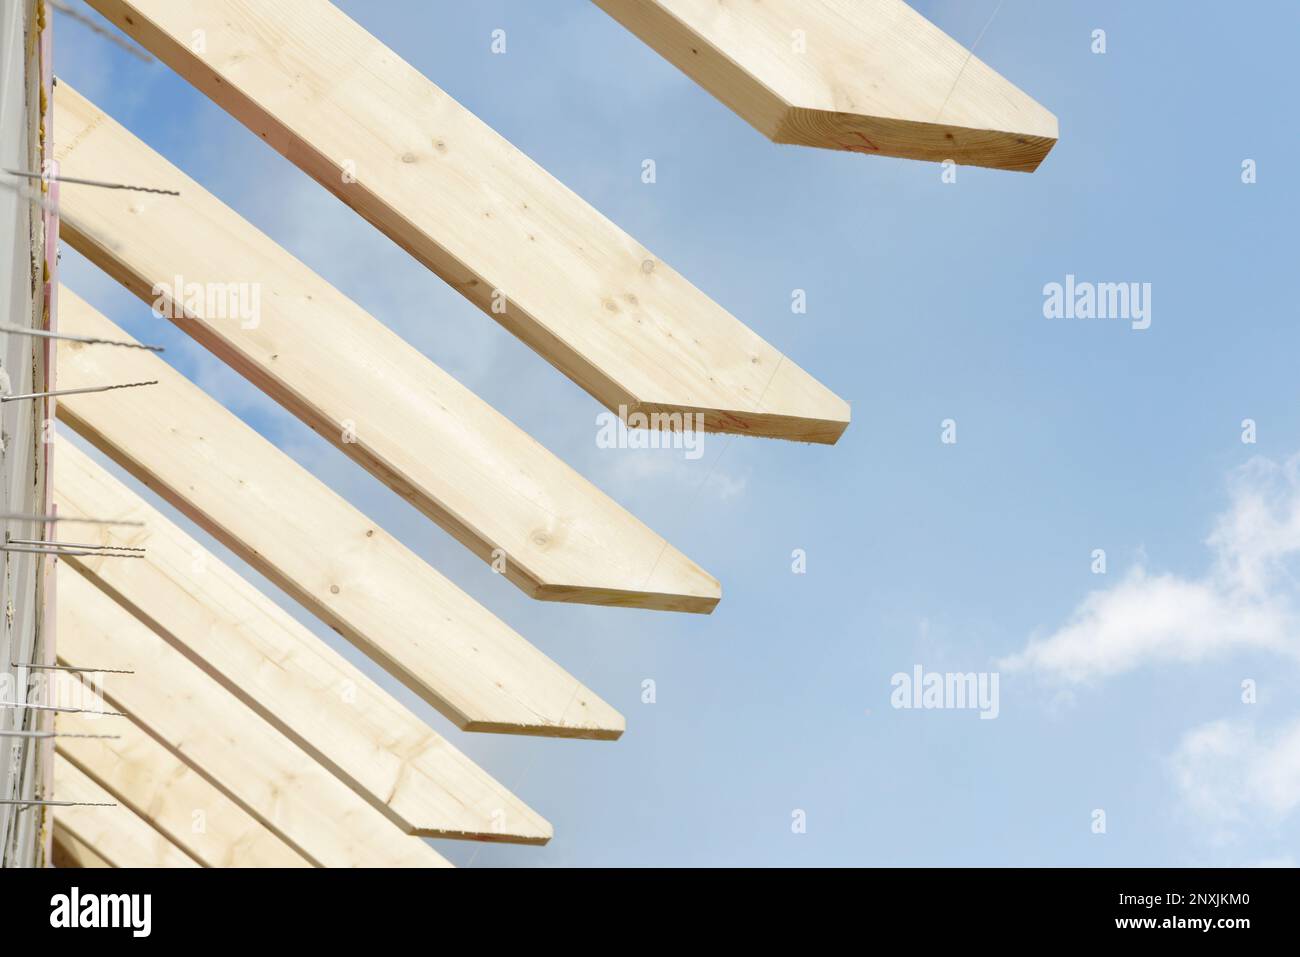 detail of the wooden roof truss when building a new house Stock Photo